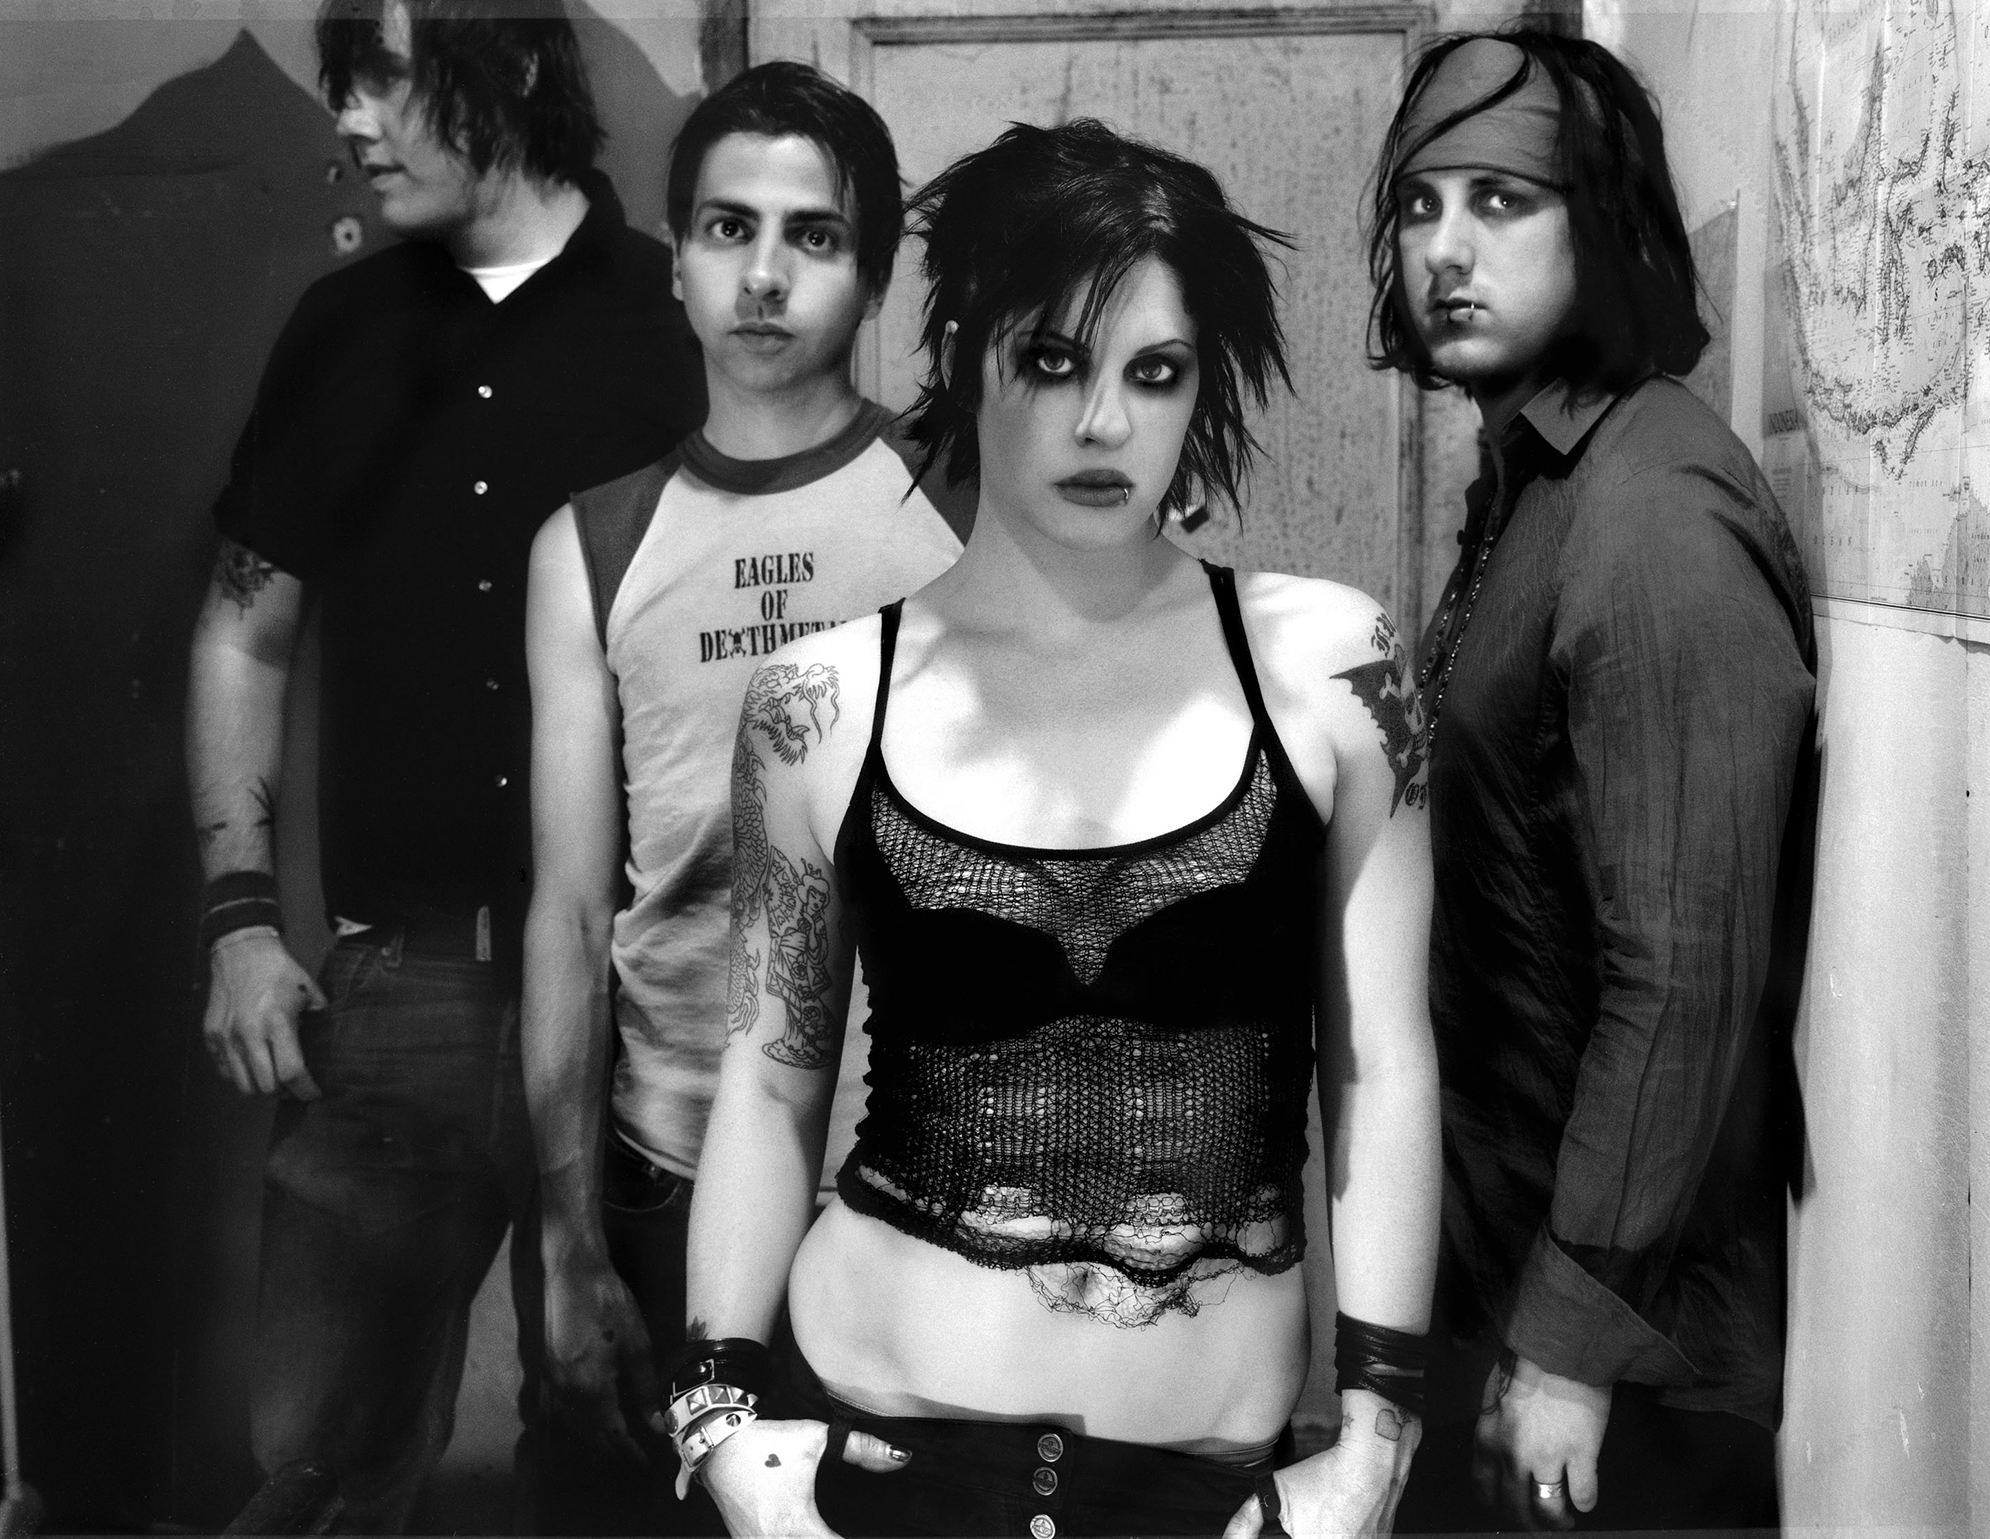 The Distillers Wallpapers